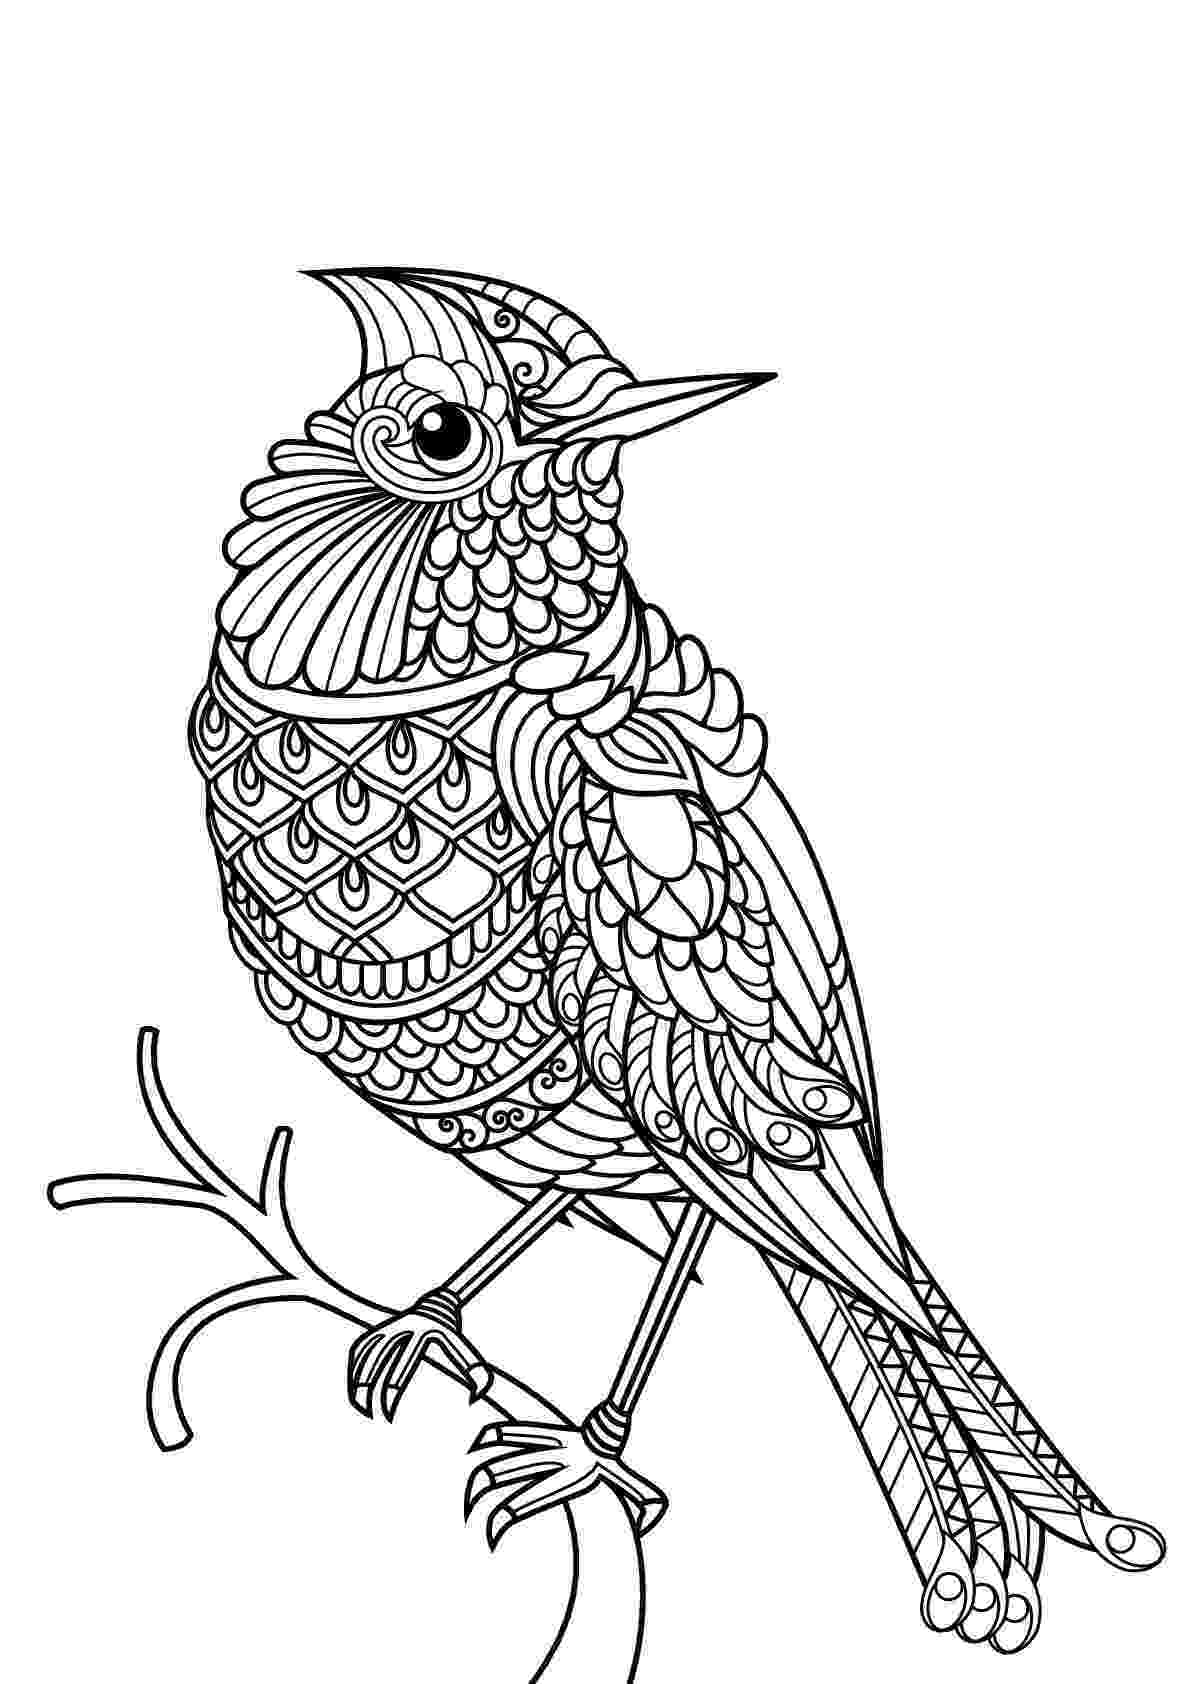 free bird coloring pages birds free to color for children birds kids coloring pages free bird pages coloring 